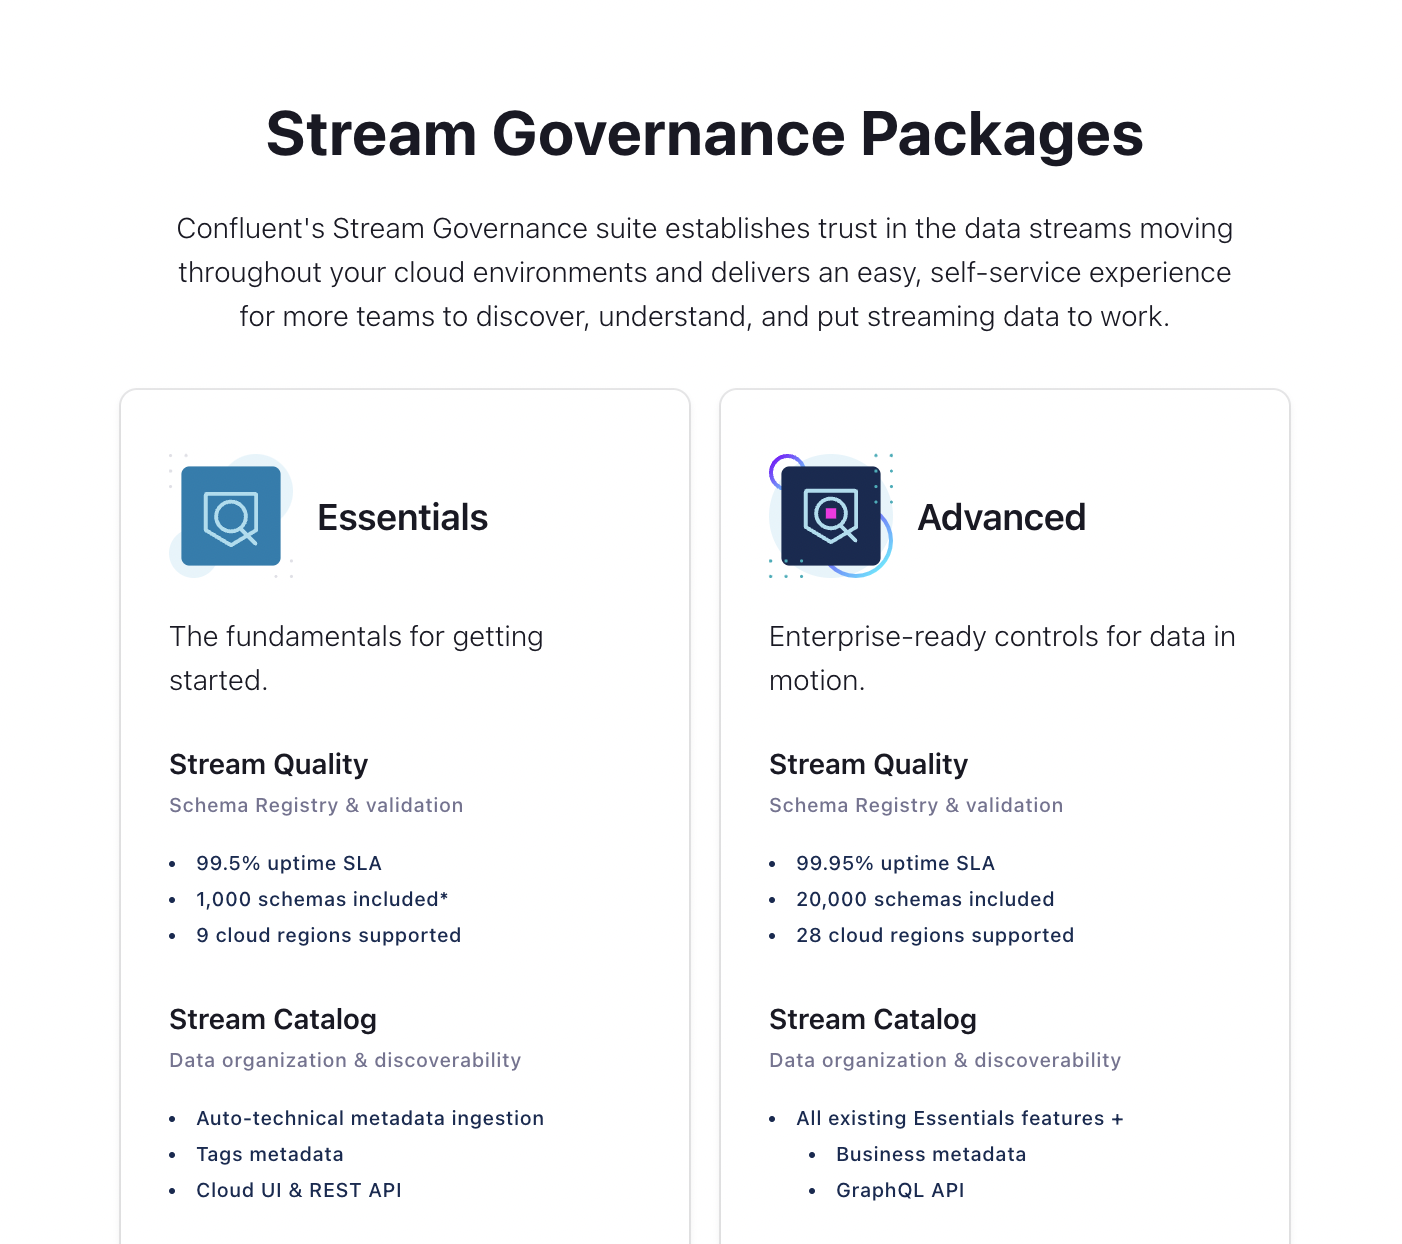 Stream Governance Packages